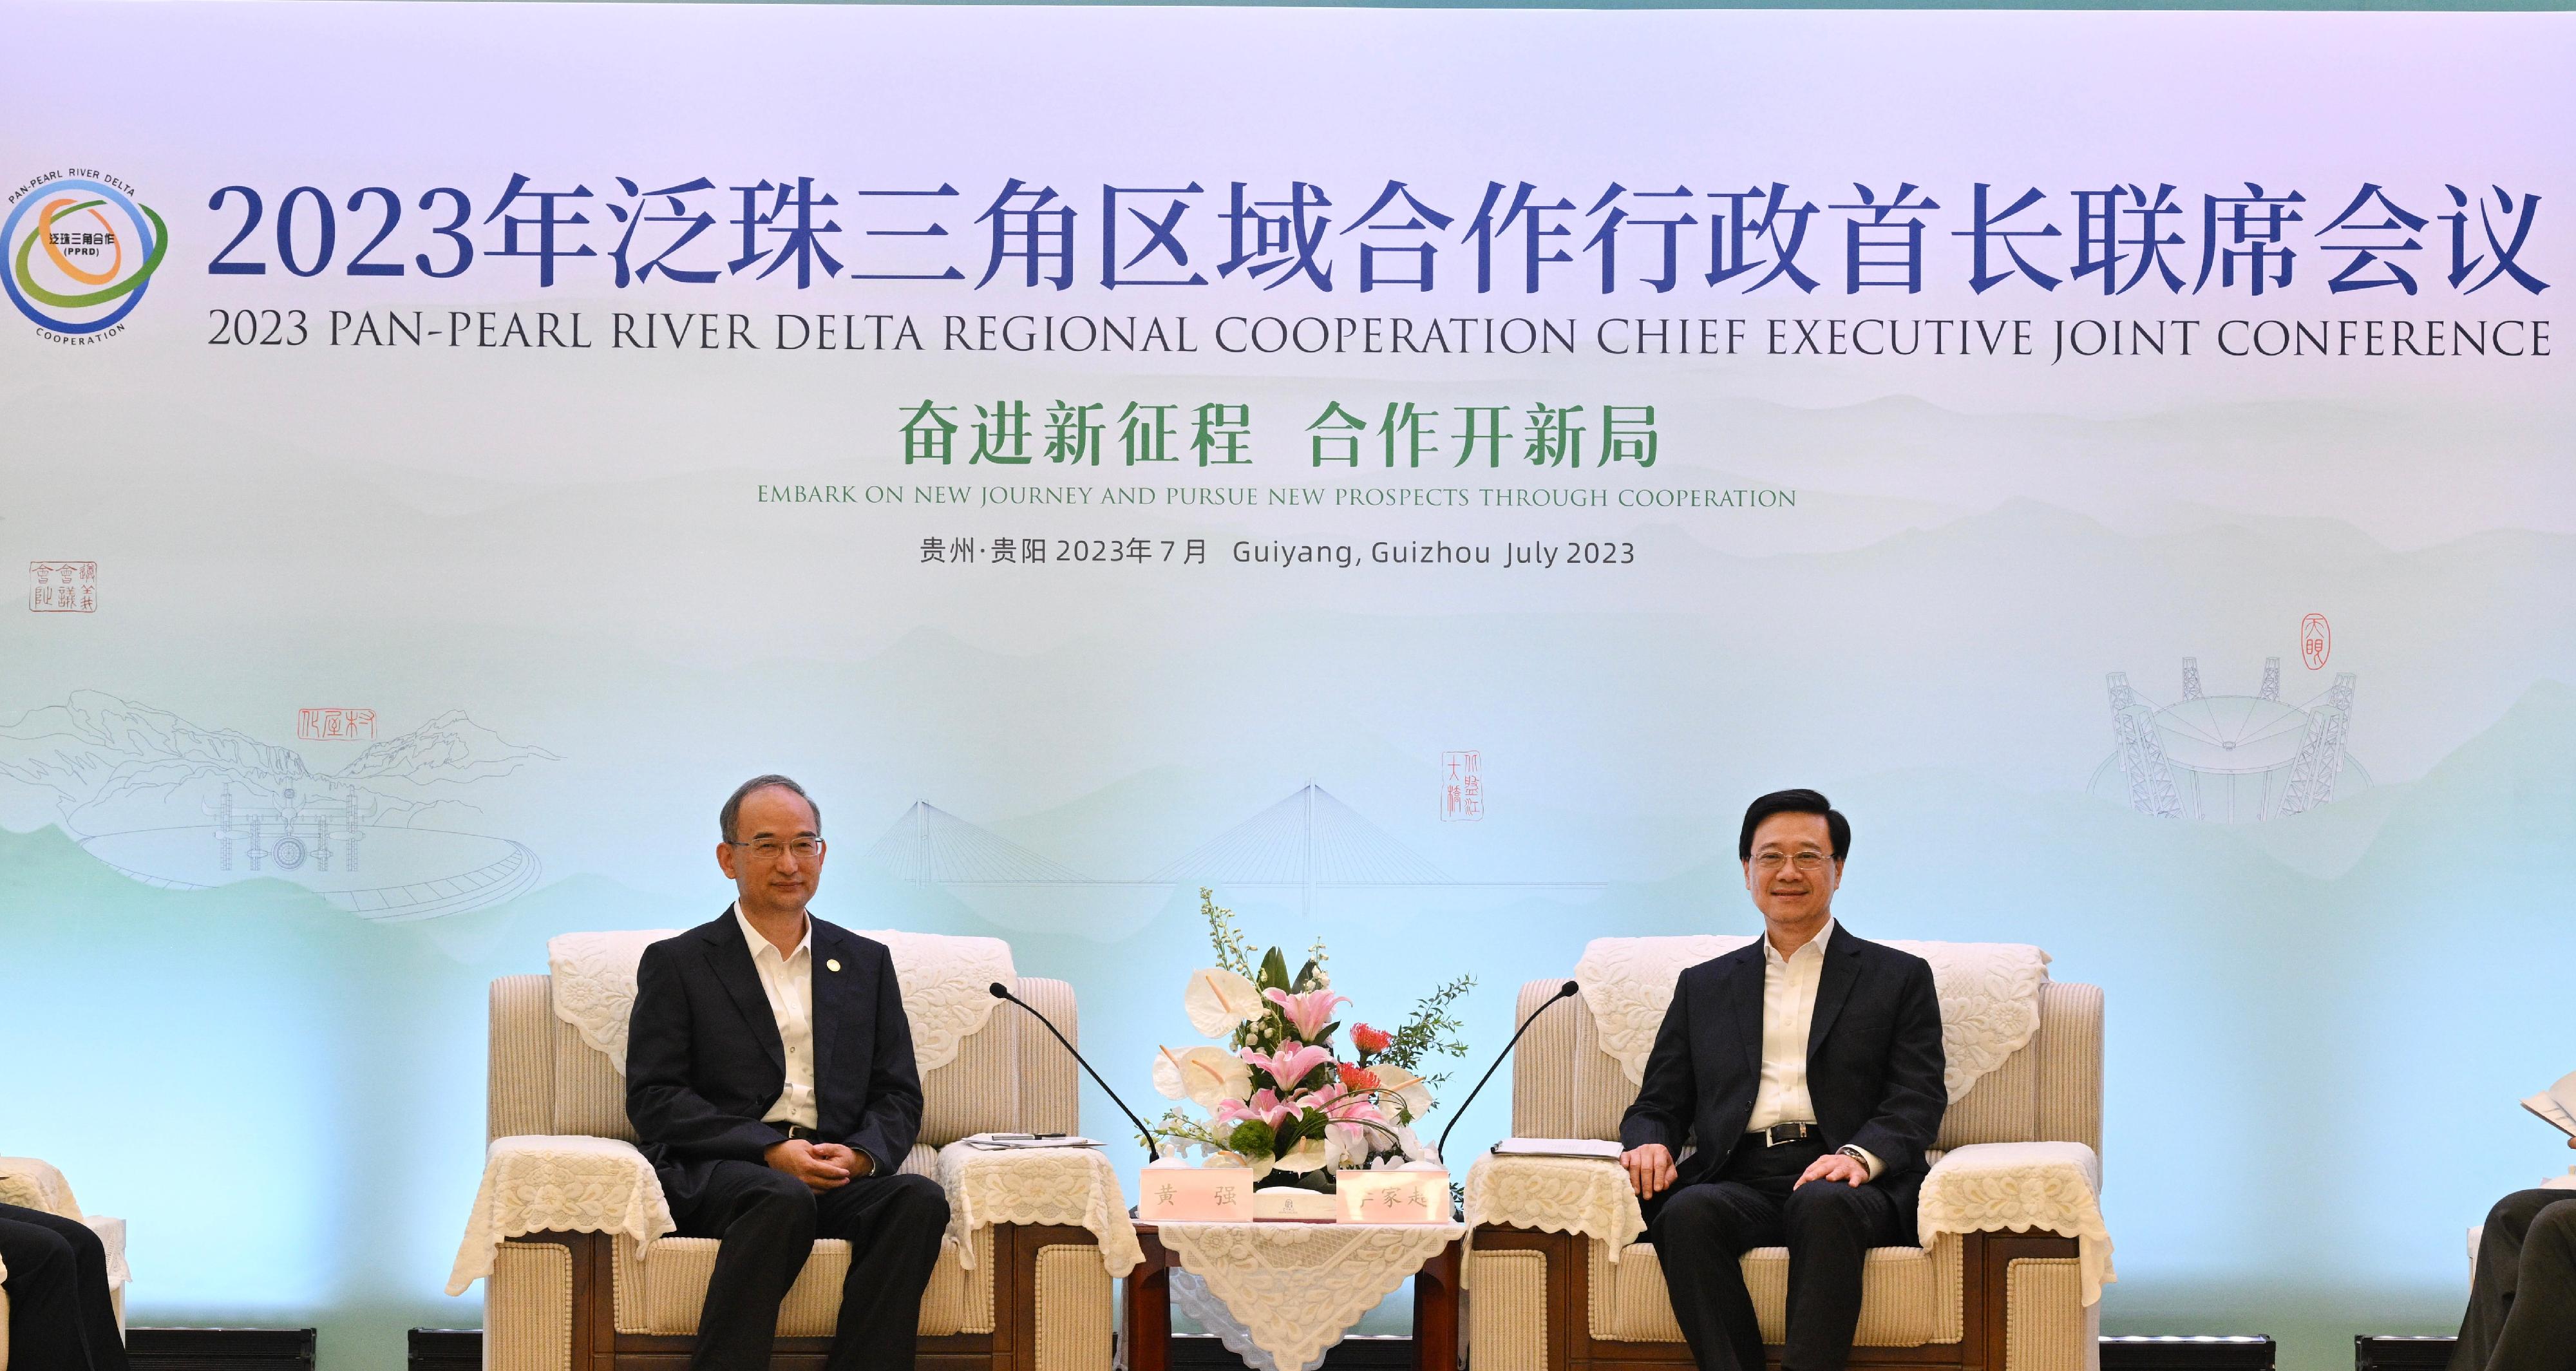 The Chief Executive, Mr John Lee, led a delegation to start his visit programme in Guiyang today (July 6). Photo shows Mr Lee (right) and the Governor of Sichuan Province, Mr Huang Qiang (left), at a bilateral meeting in Guiyang.
